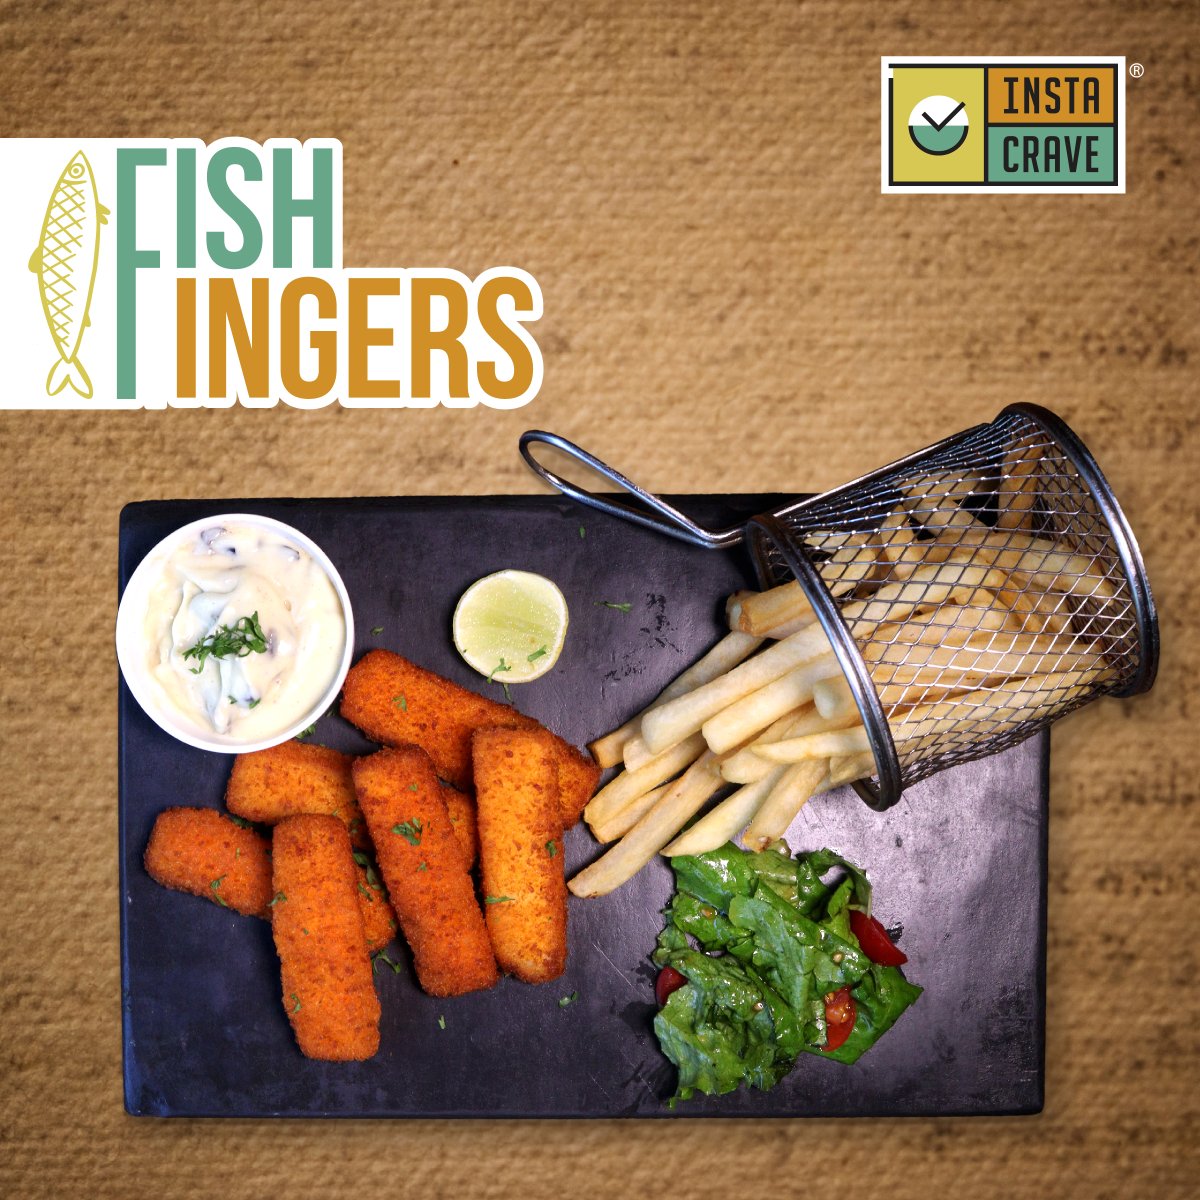 Fish Fingers are love❤️❤️Tag your squad and make them crave for this juicy and tasty fish fingers...😍😍 . . . #Instacrave #fishfinger #fish #seafood #foodlover #foodies #foody #fishlover #fishfood #hotfood #foods #foody #foodyoulove #fooddelivery #foodlovers #WednesdayWisdom